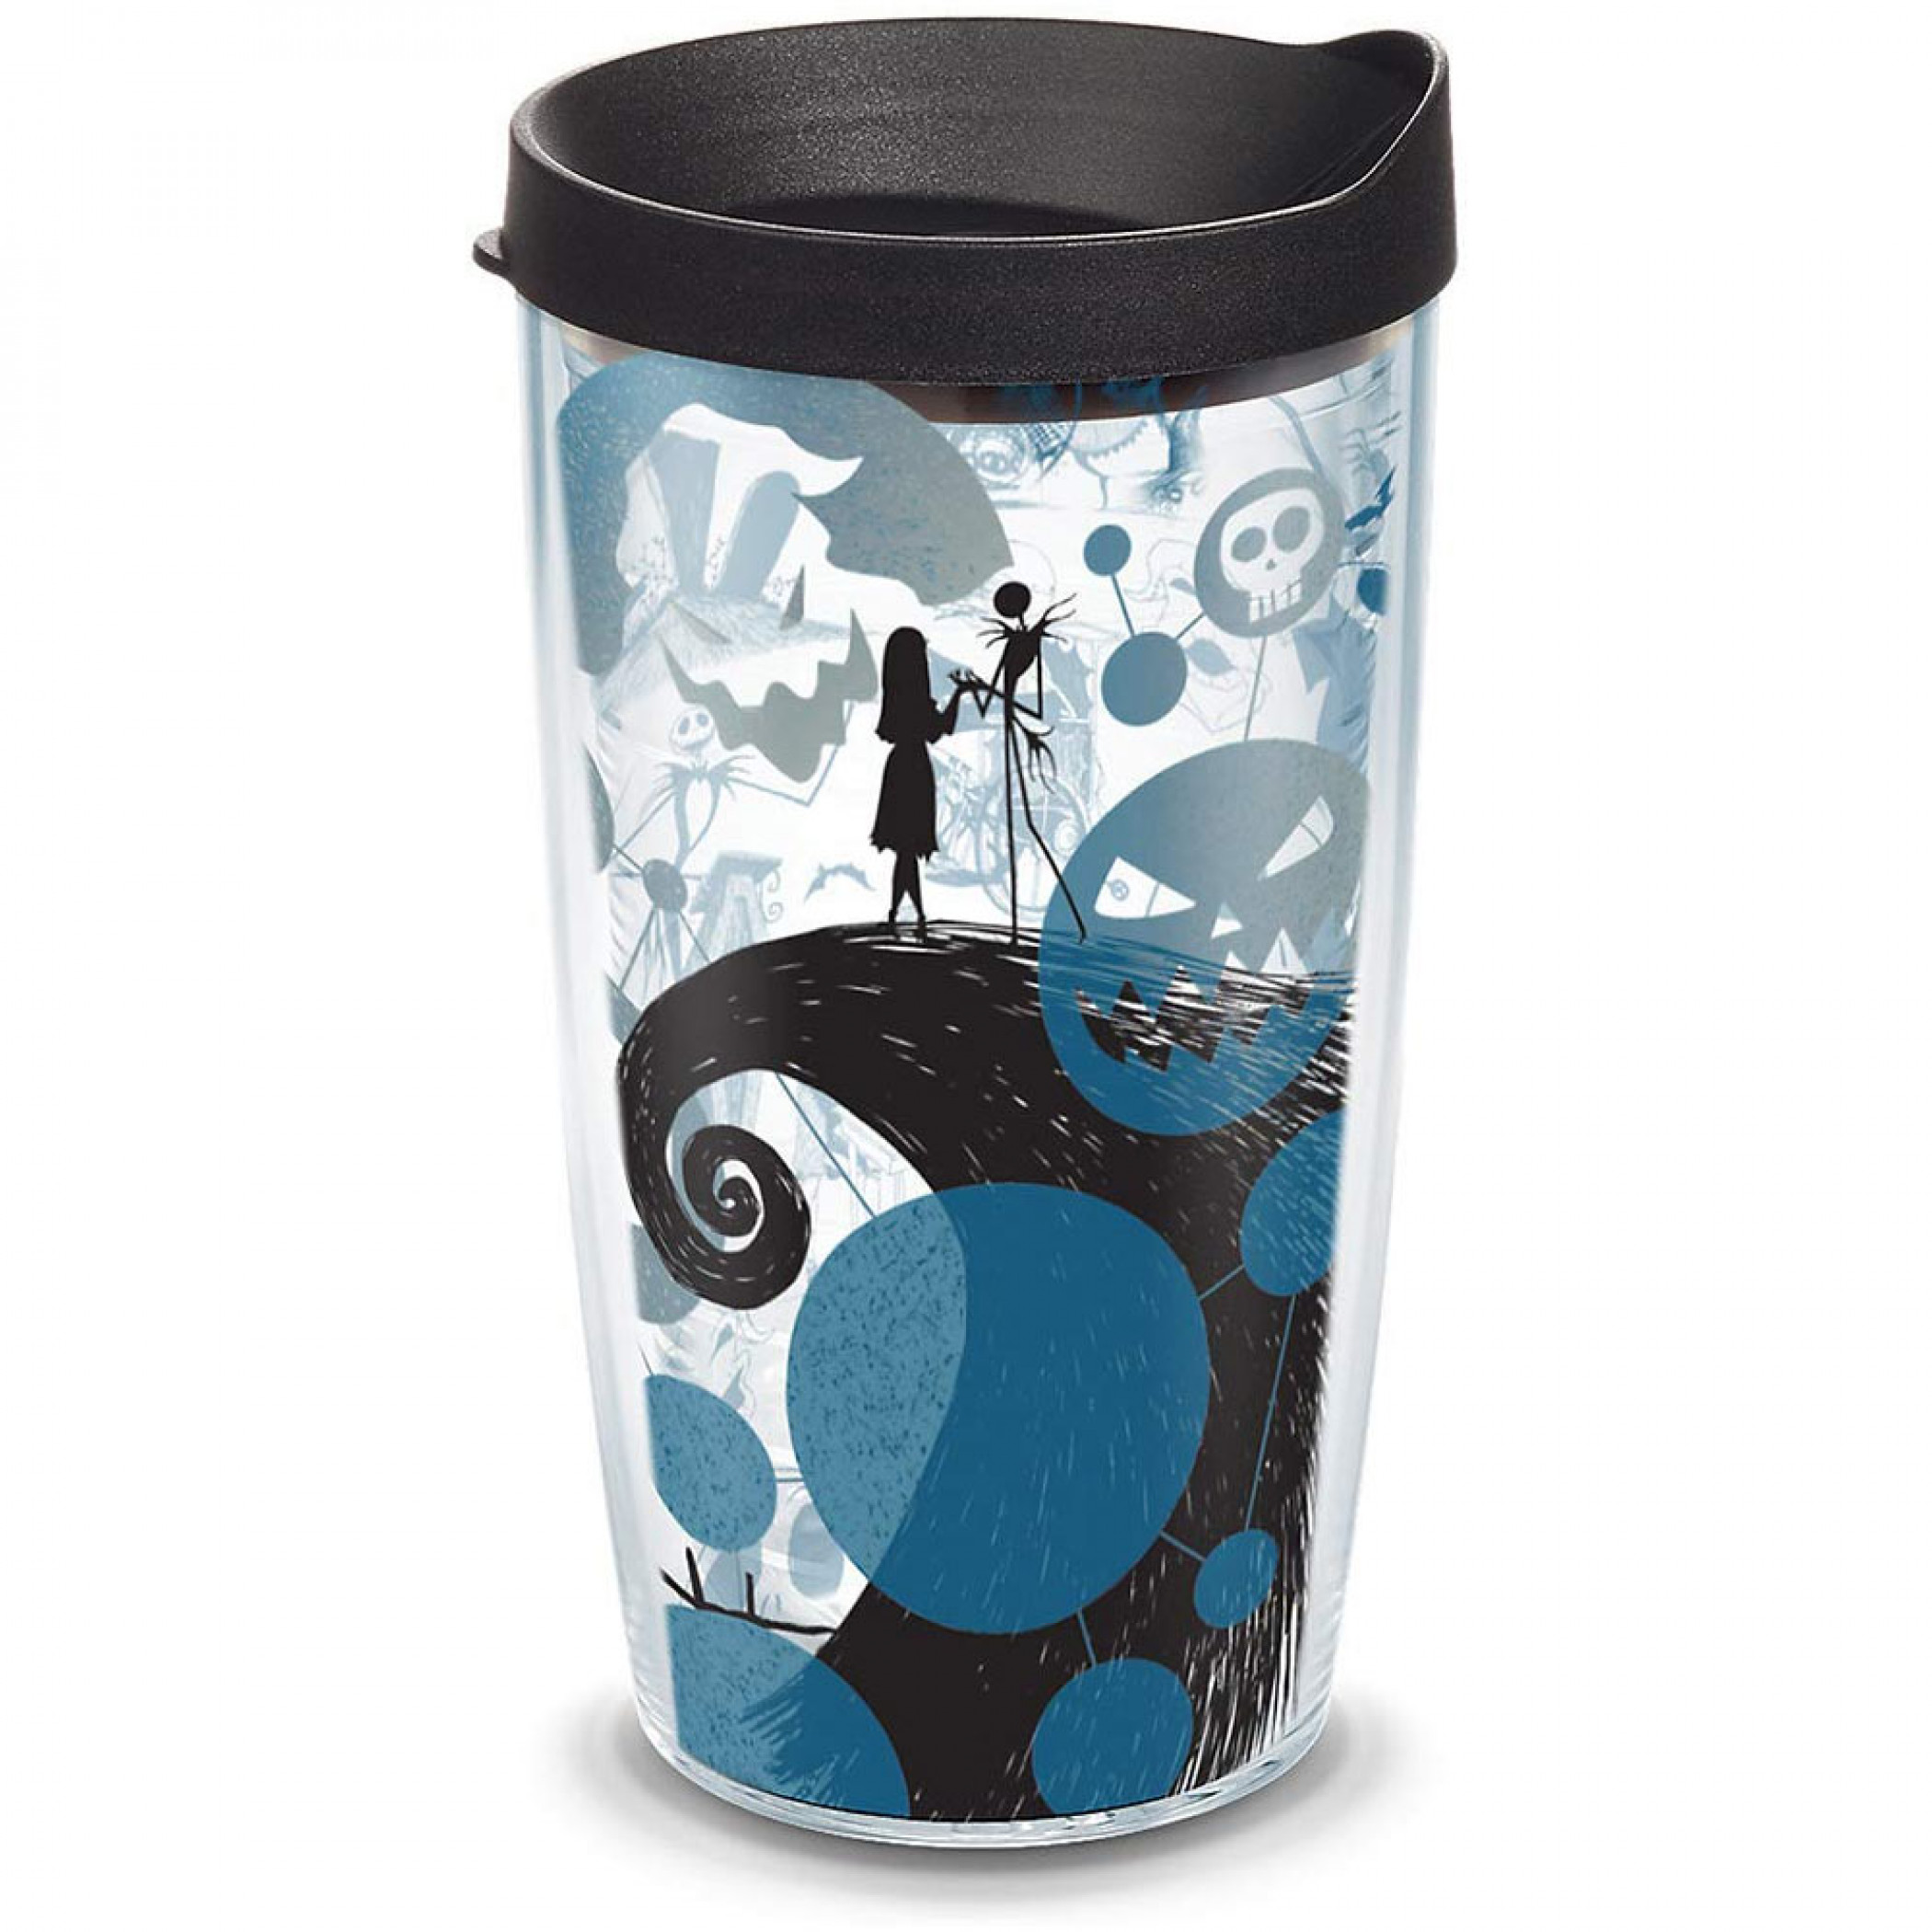 Nightmare Before Christmas Car Cup Holder Coaster 2-Pack